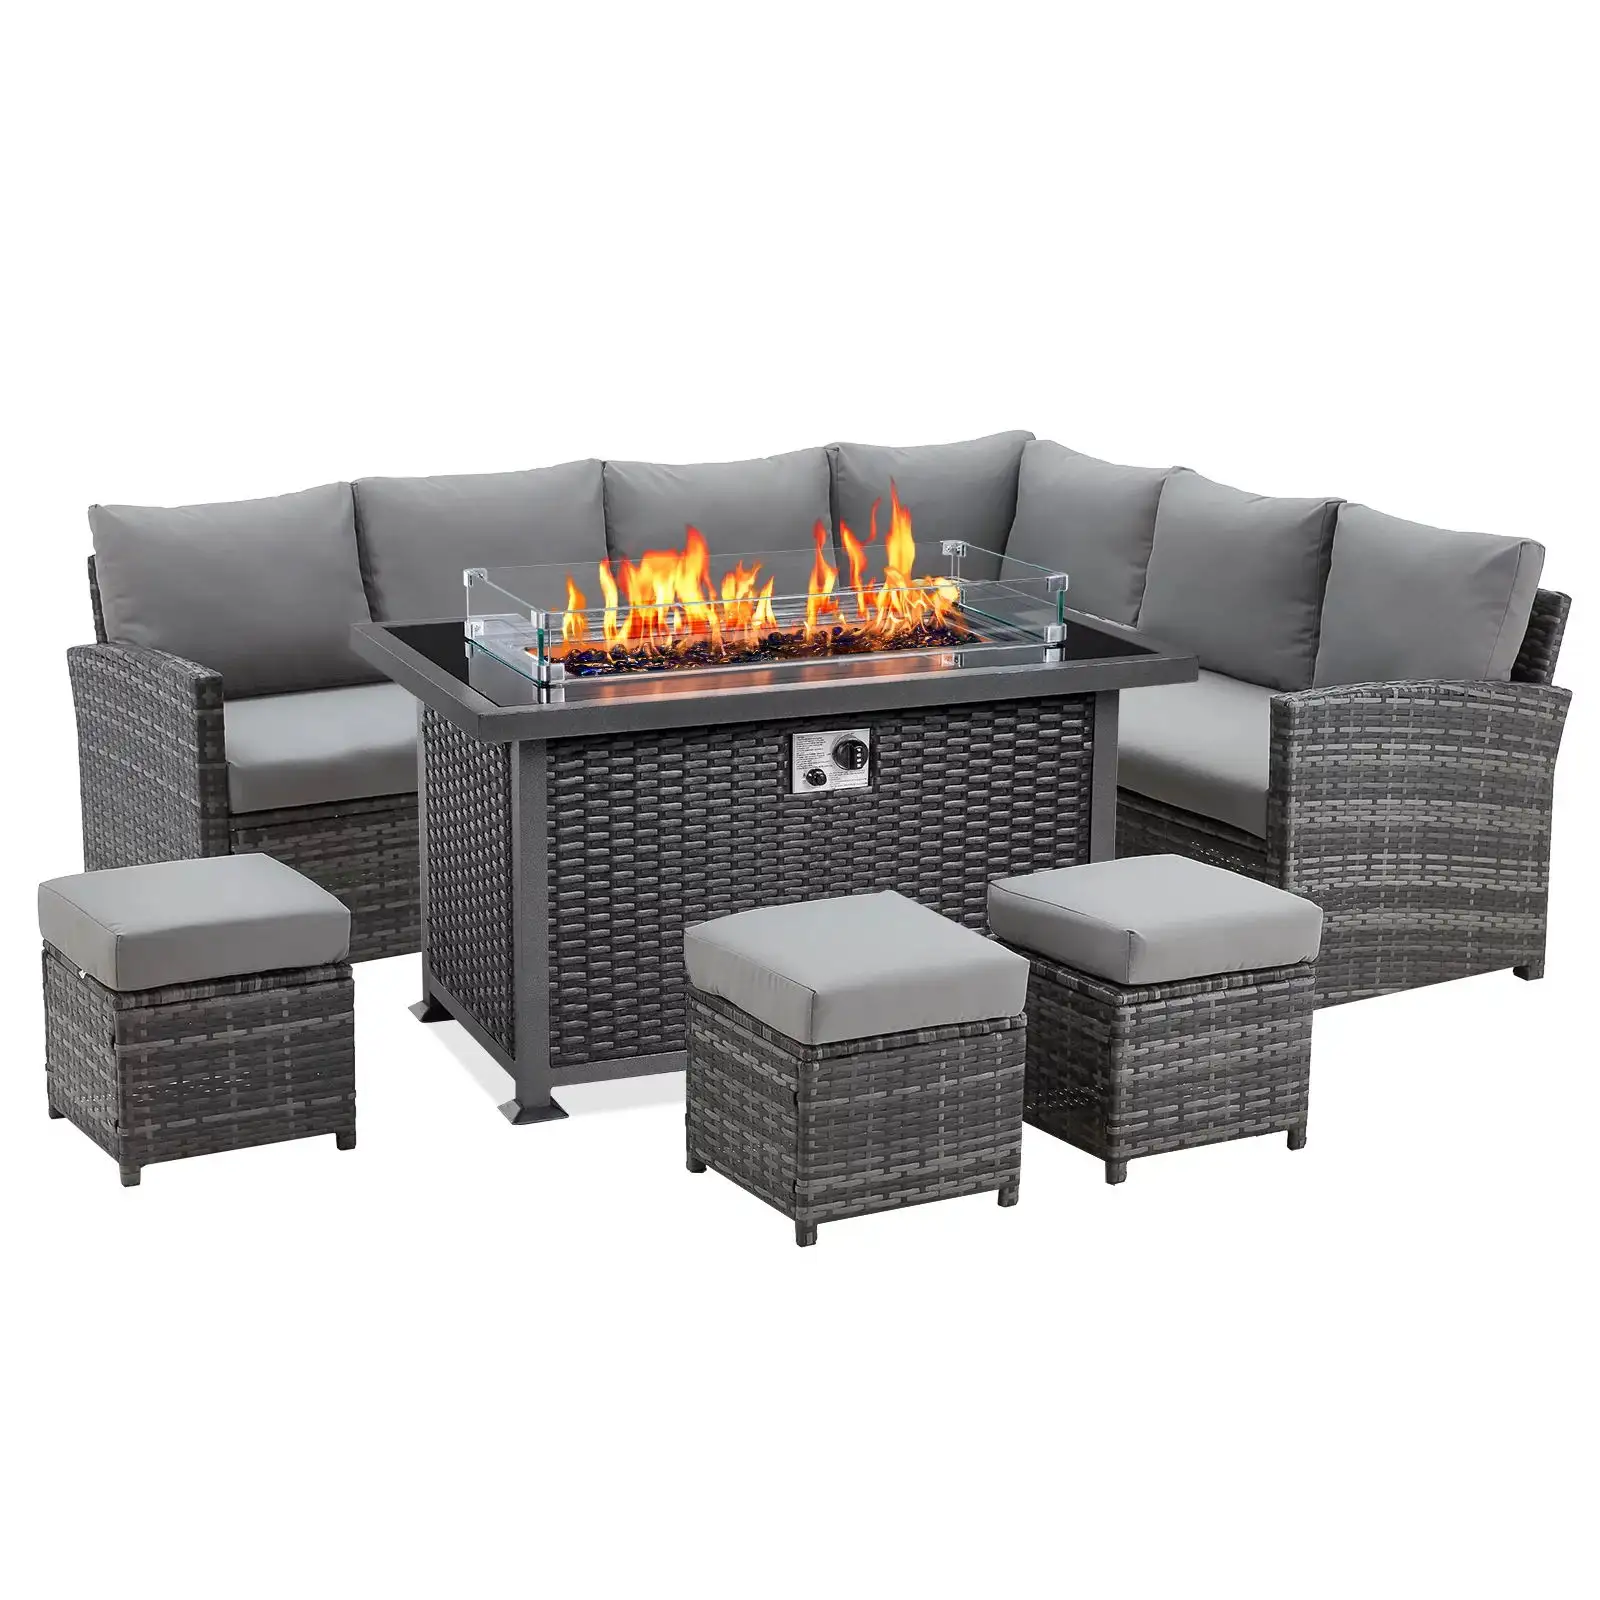 YASN Hot Selling Outdoor Modern Garden Furniture Wicker Rattan Patio Furniture Set With Fire Pit Table